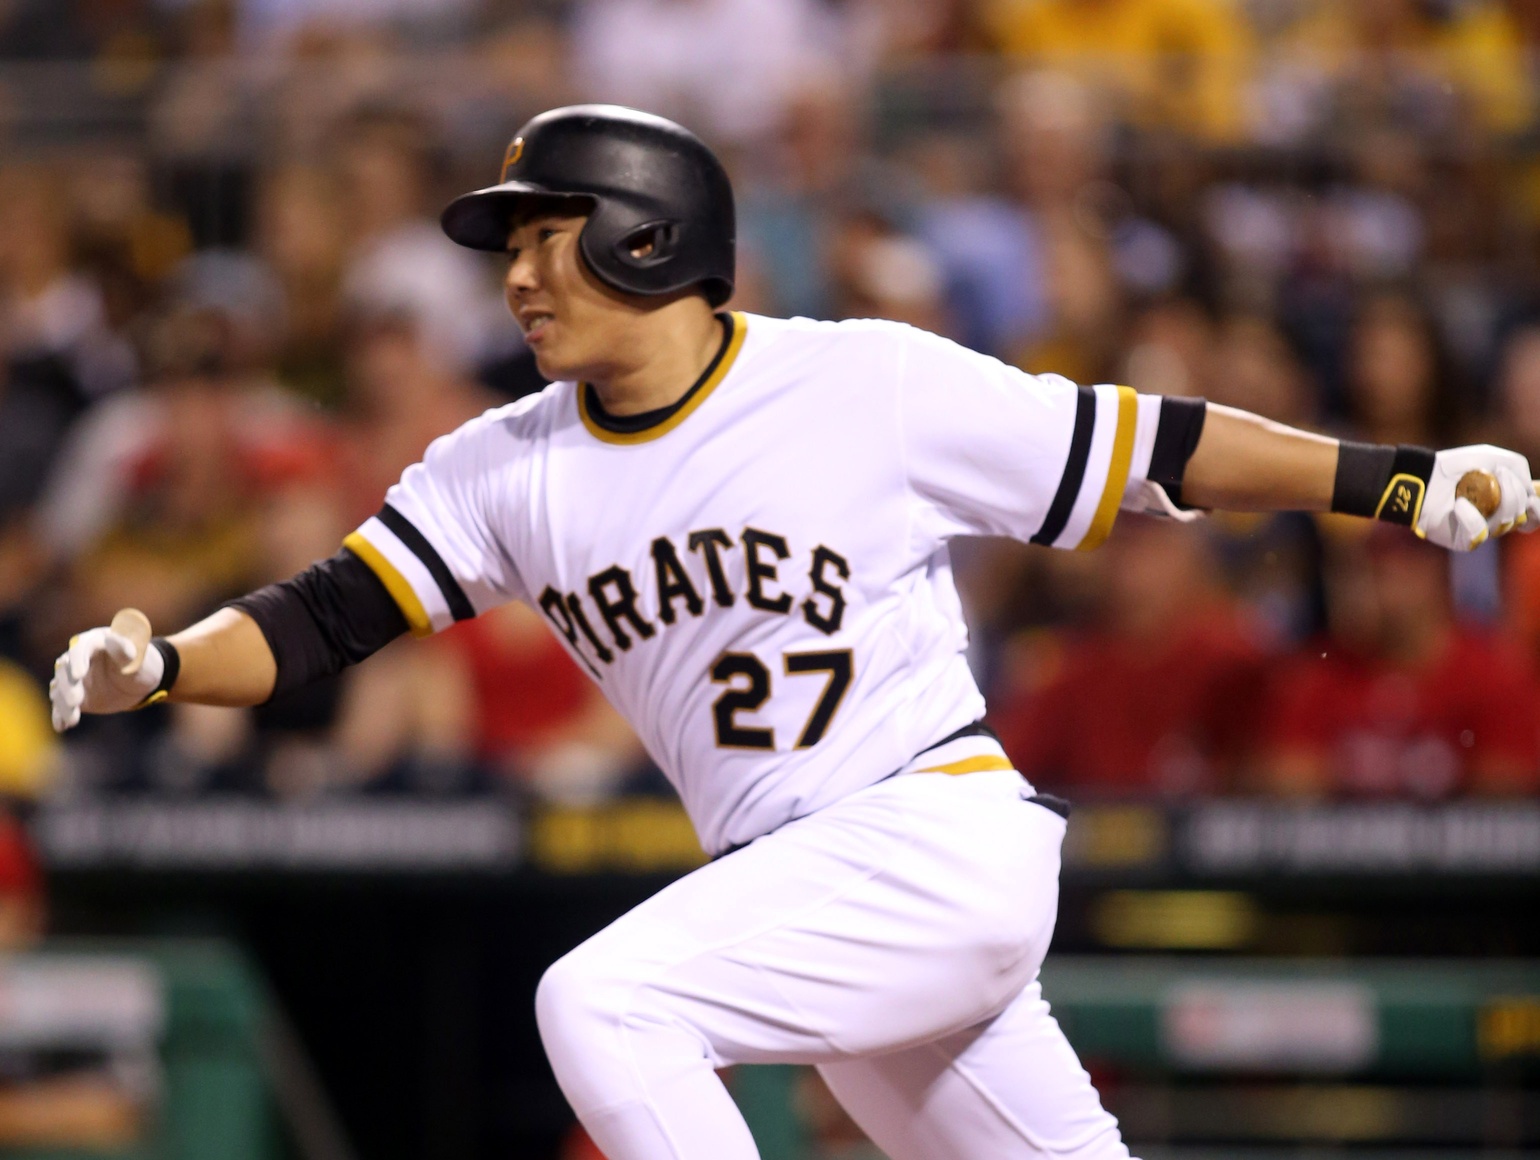 Pirates infielder Jung Ho Kang arrested for DUI in South Korea